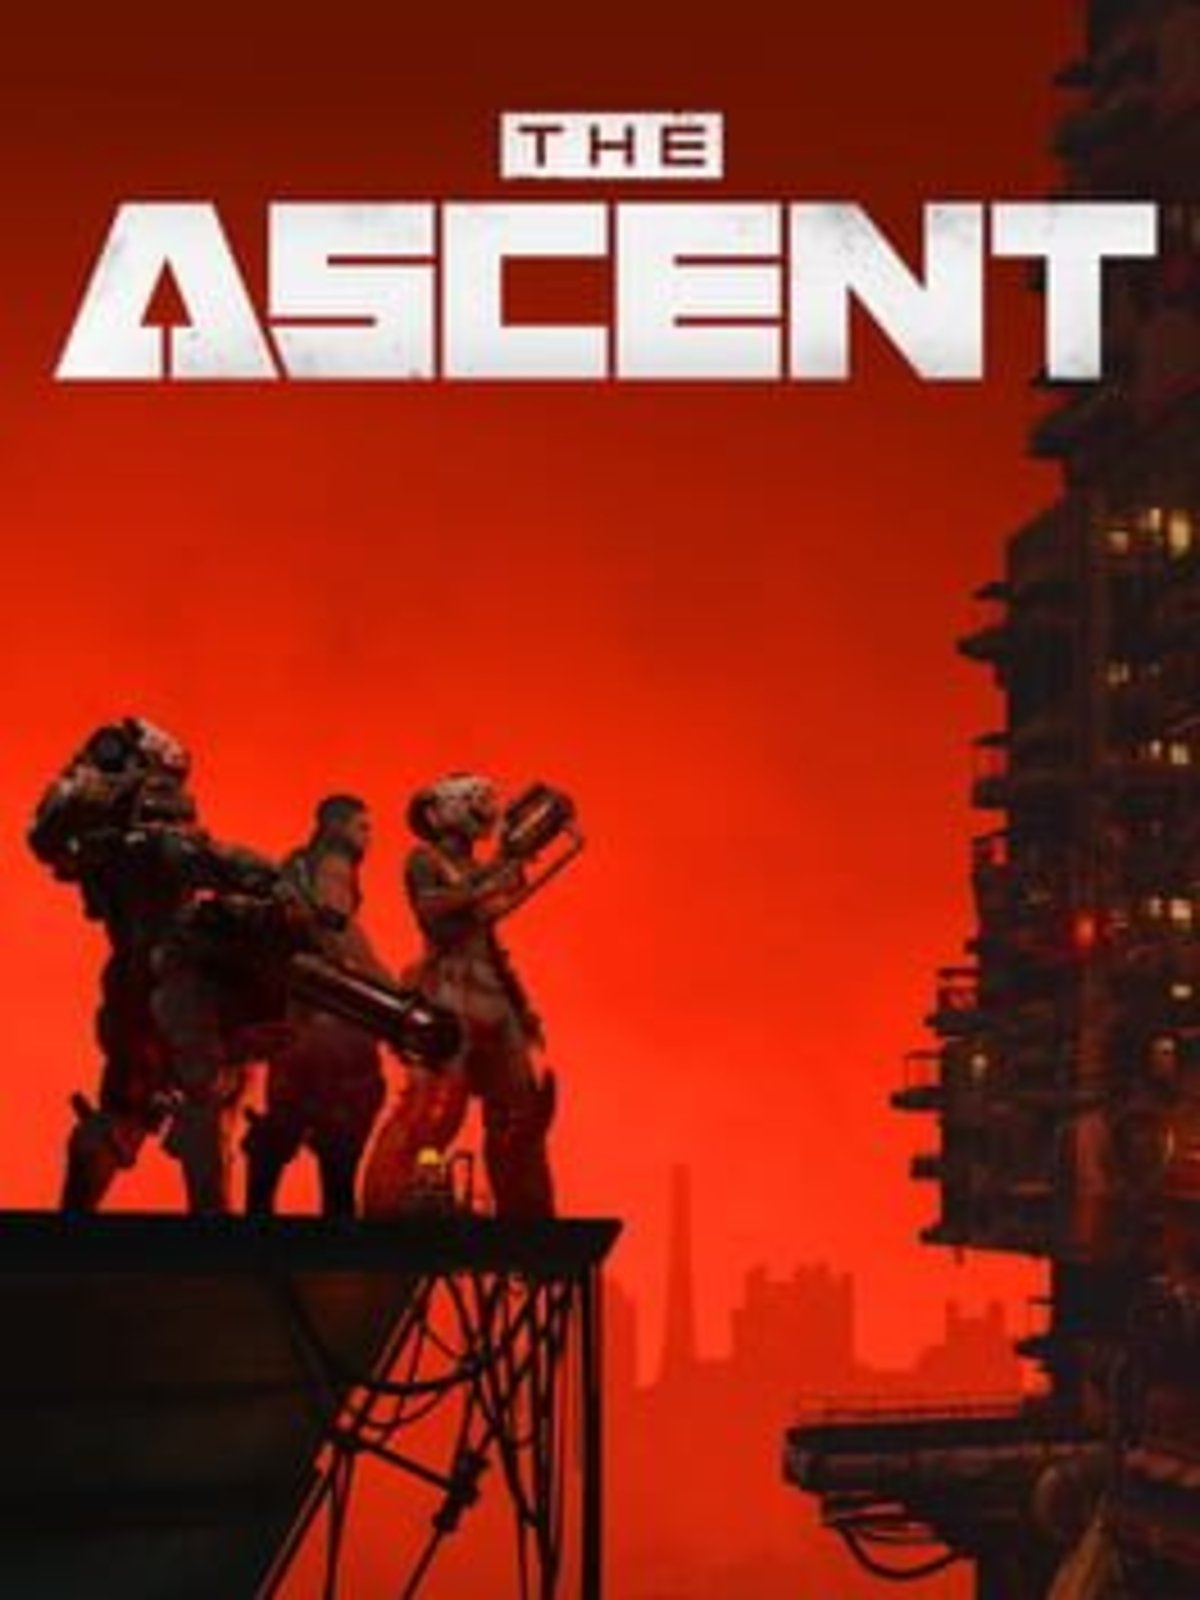 The Ascent shines with 14 minutes of gameplay